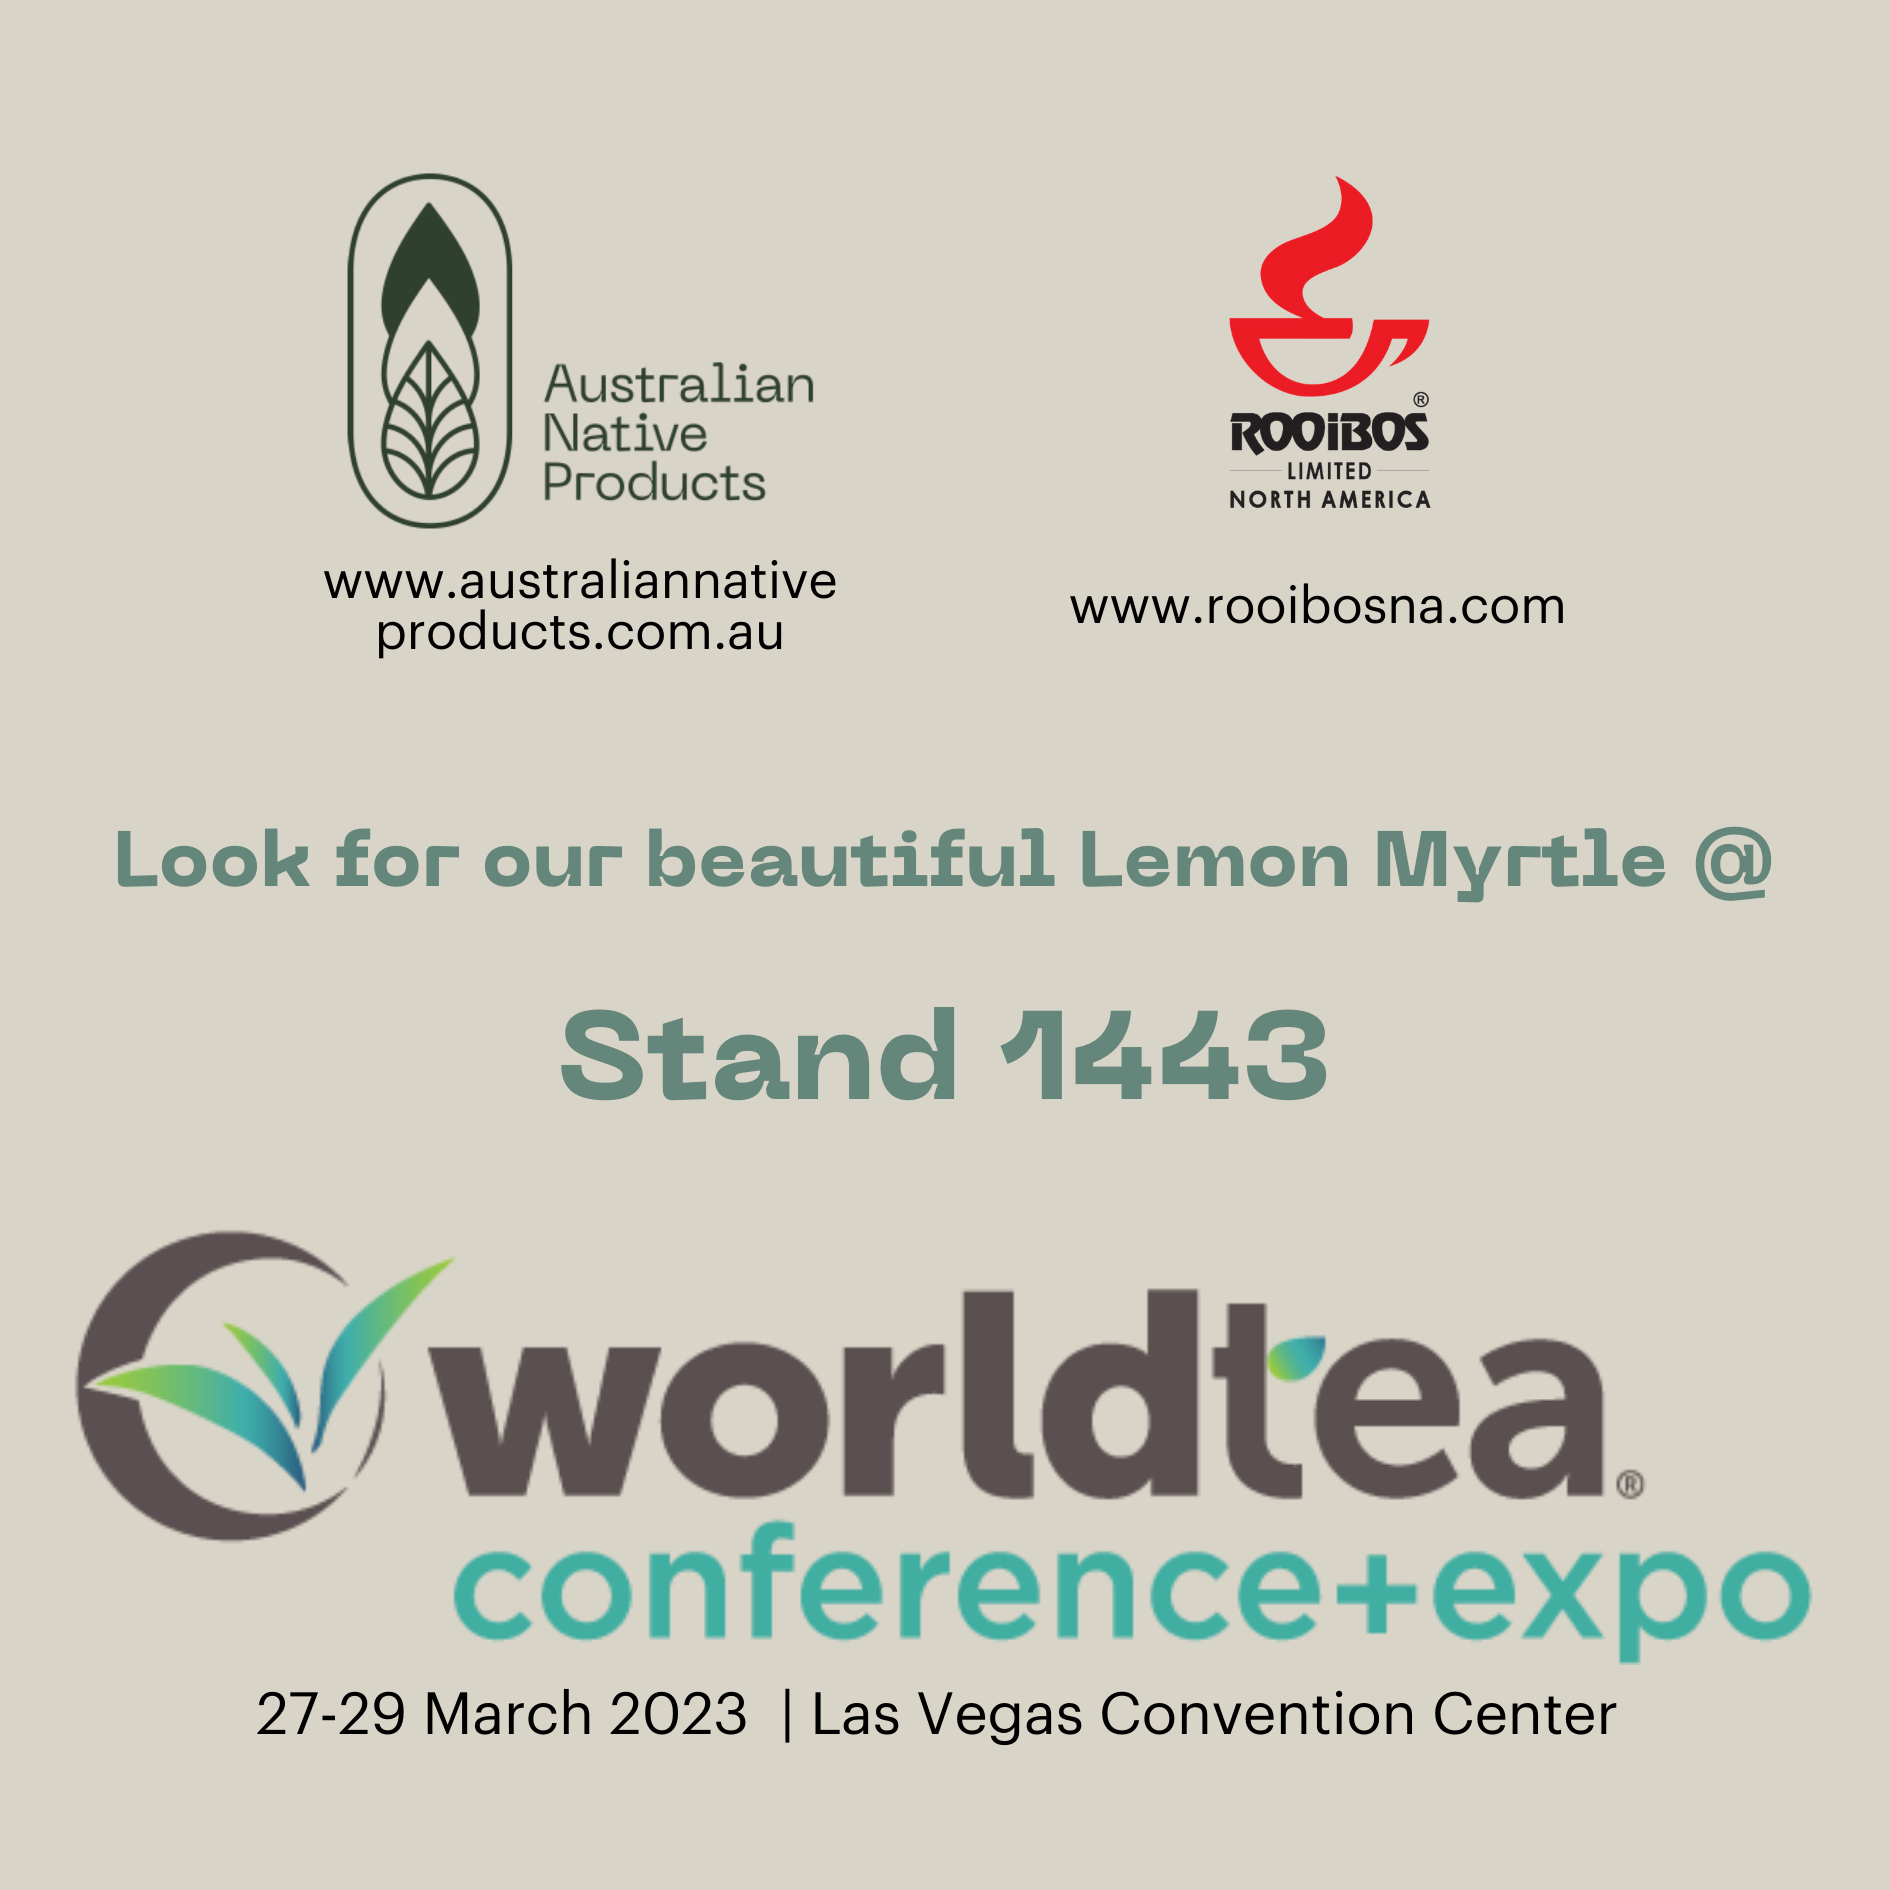 Meet “the Queen” at the World Tea Conference & Expo 2023